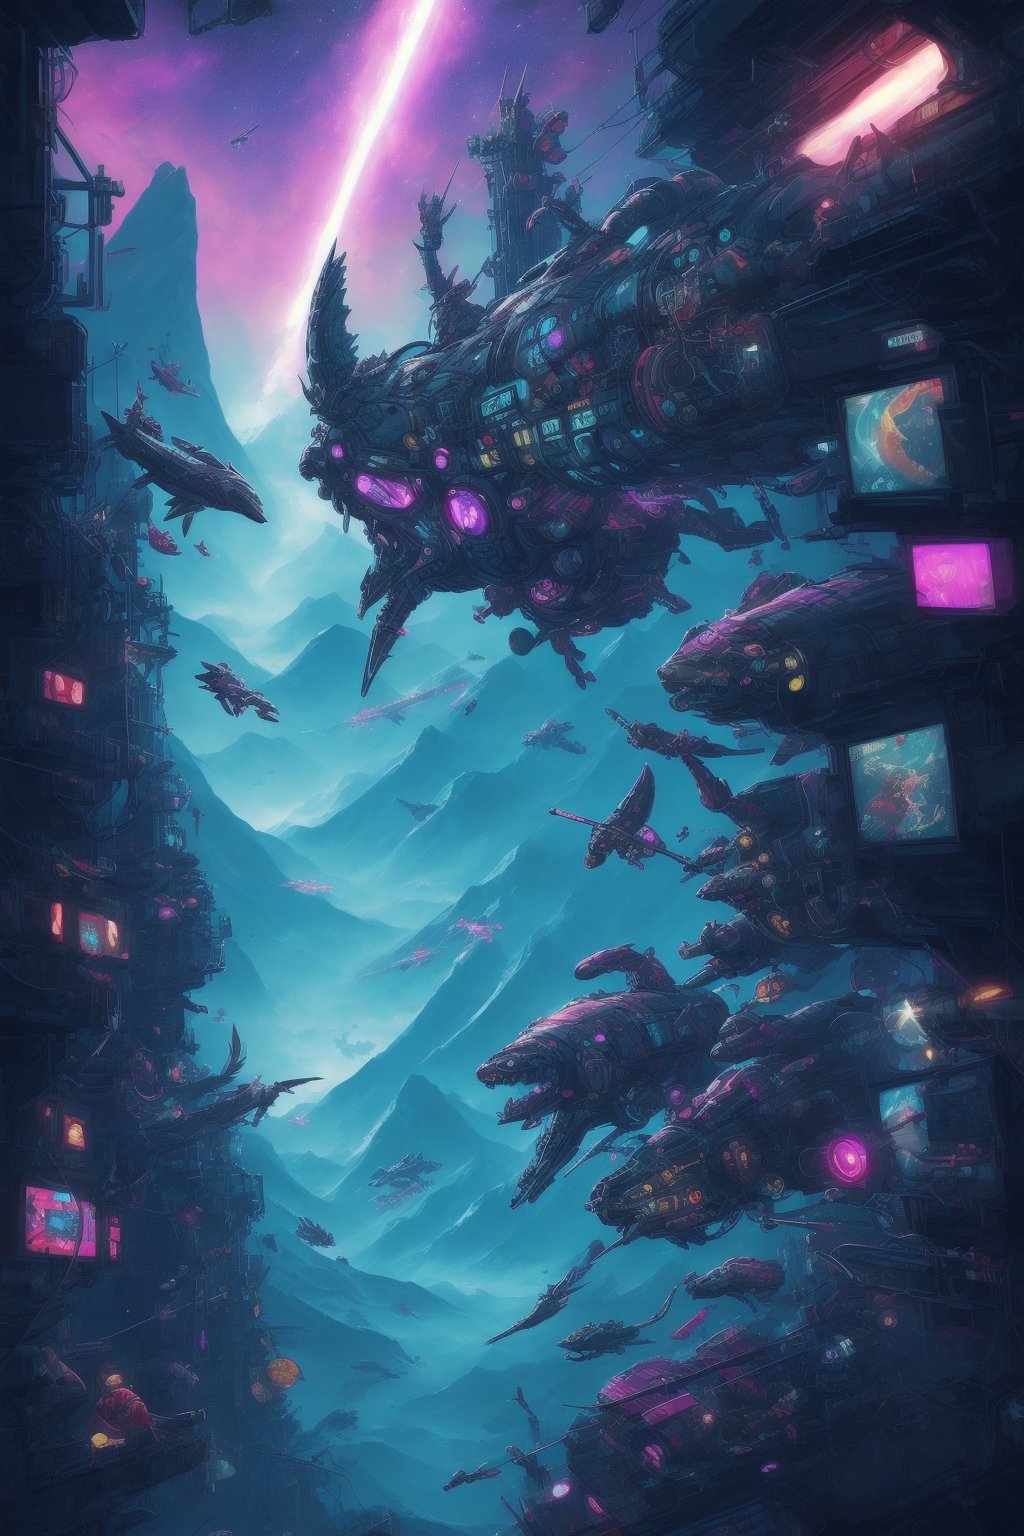 With the theme of animals from the Classic of Mountains and Seas. have many animals in the picture. The background is a space station, cyberpunk style